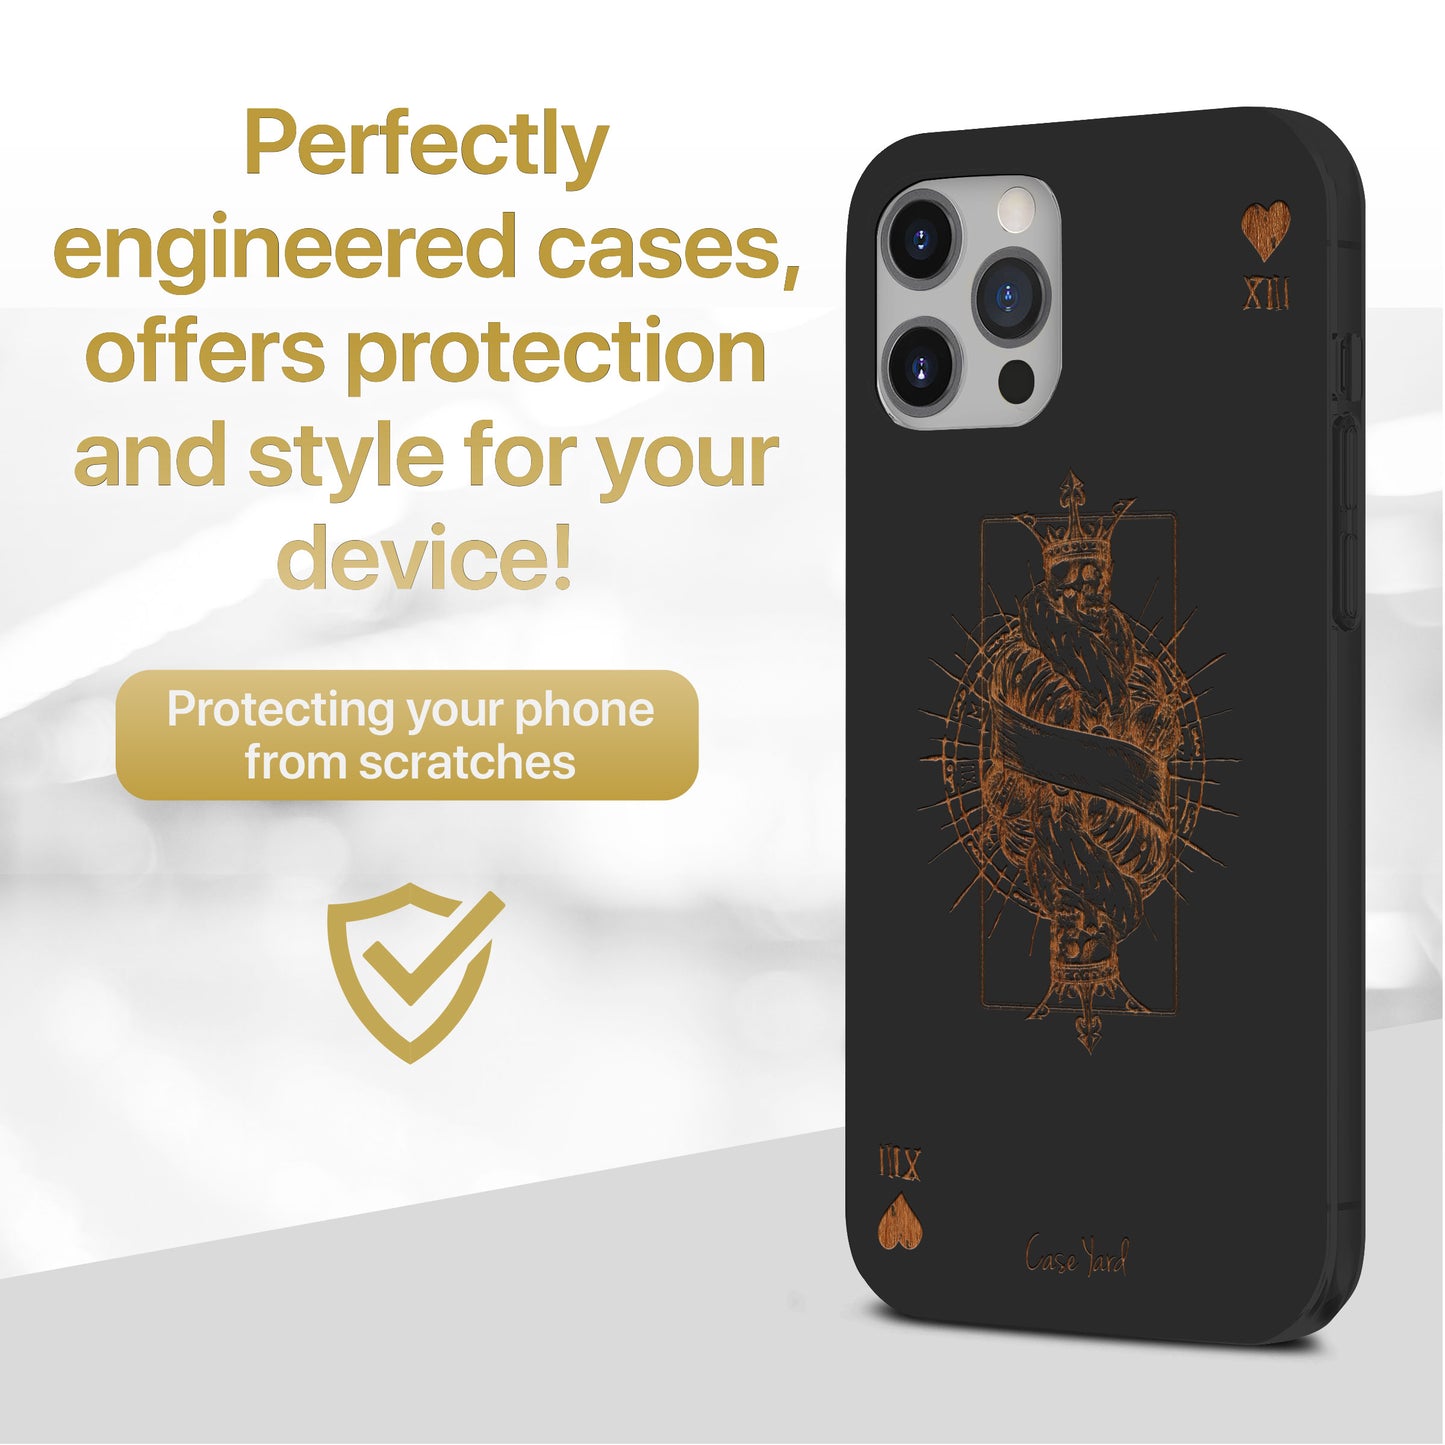 Wooden Cell Phone Case Cover, Laser Engraved case for iPhone & Samsung phone King of Hearts Design